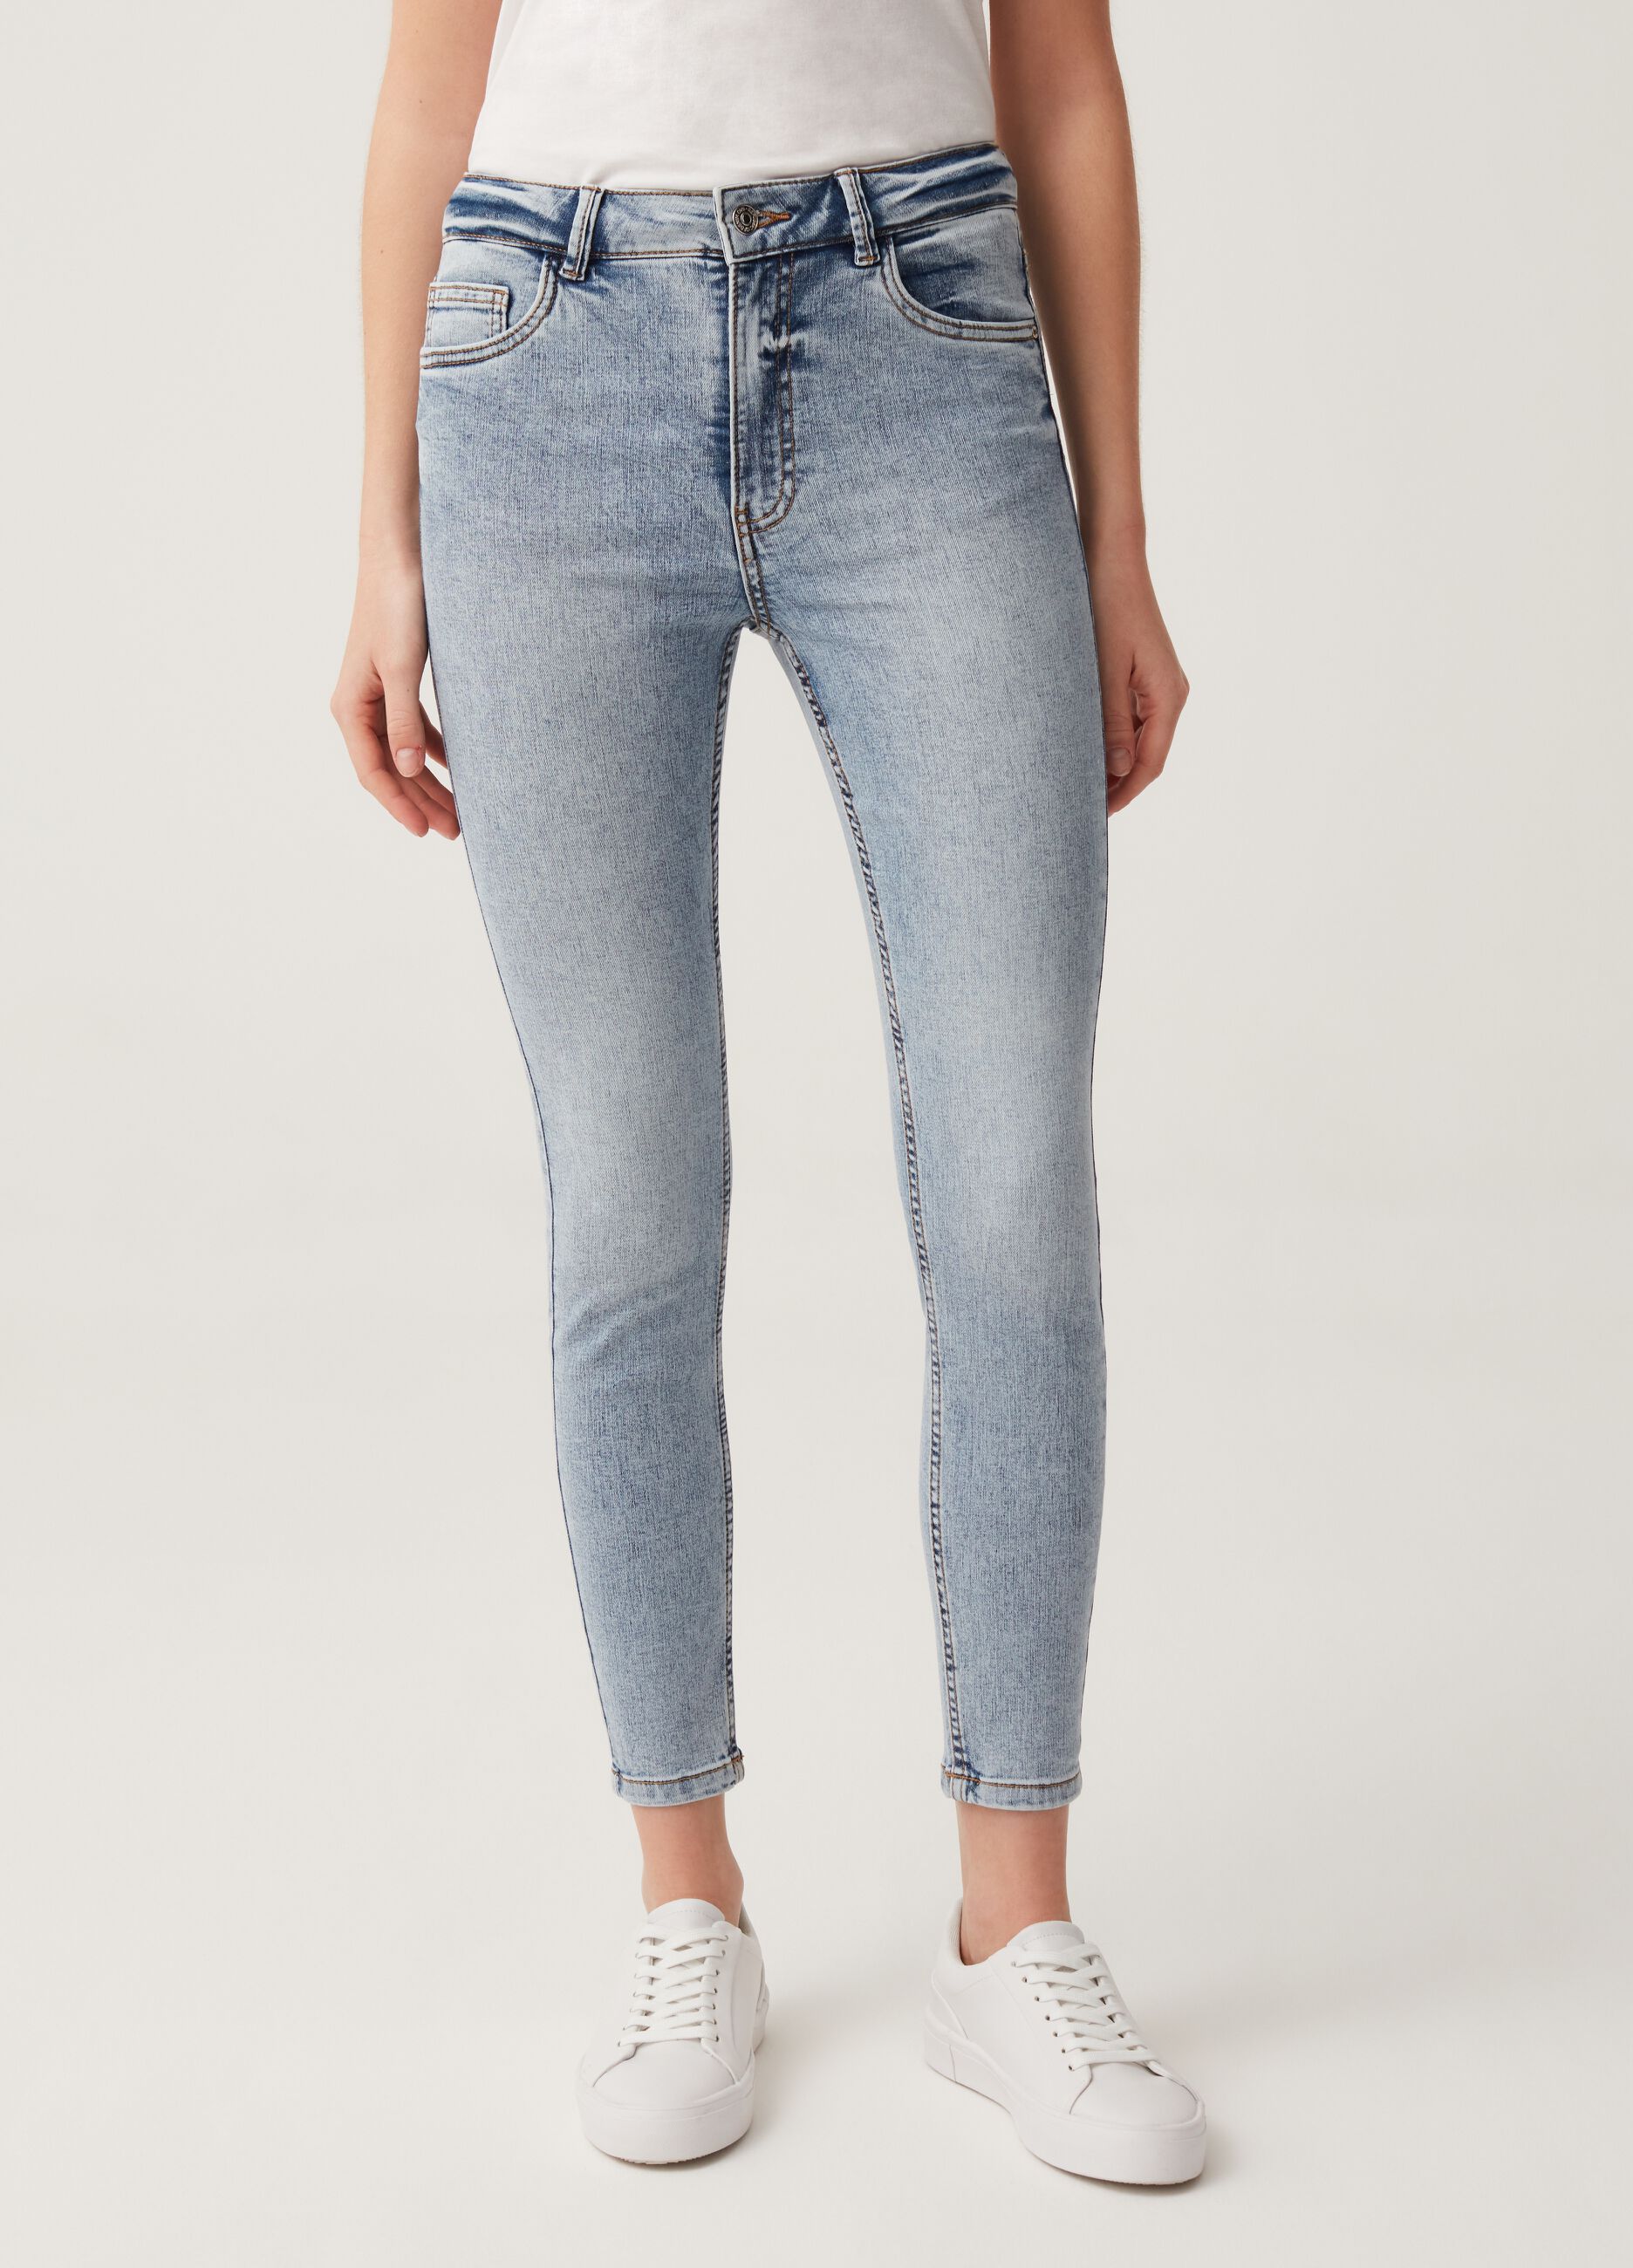 High-rise, skinny fit jeans